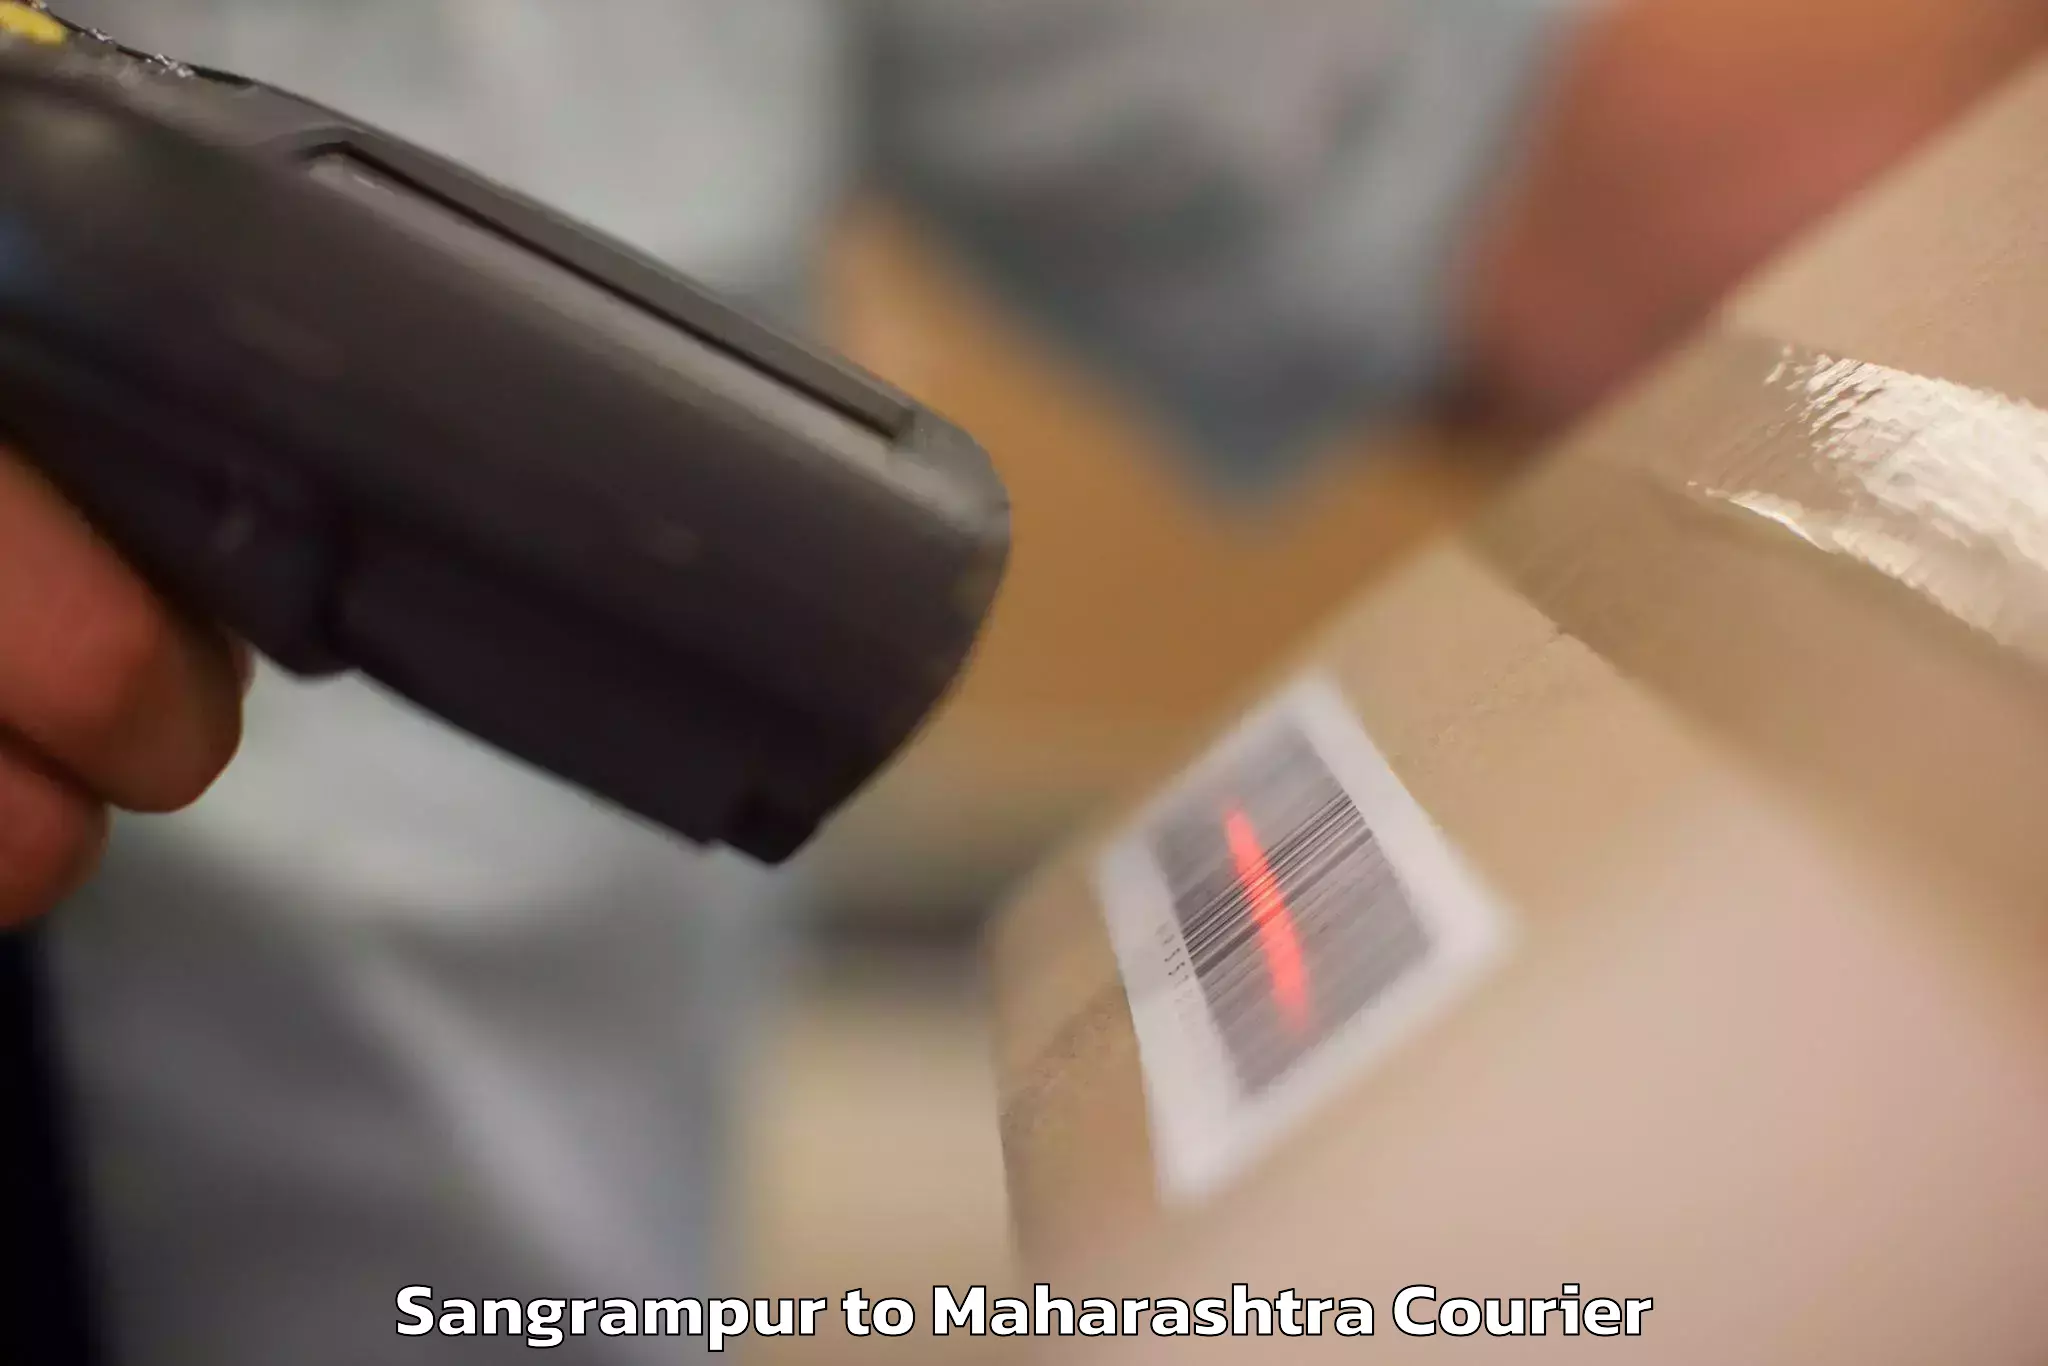 Personal effects shipping Sangrampur to IIIT Pune